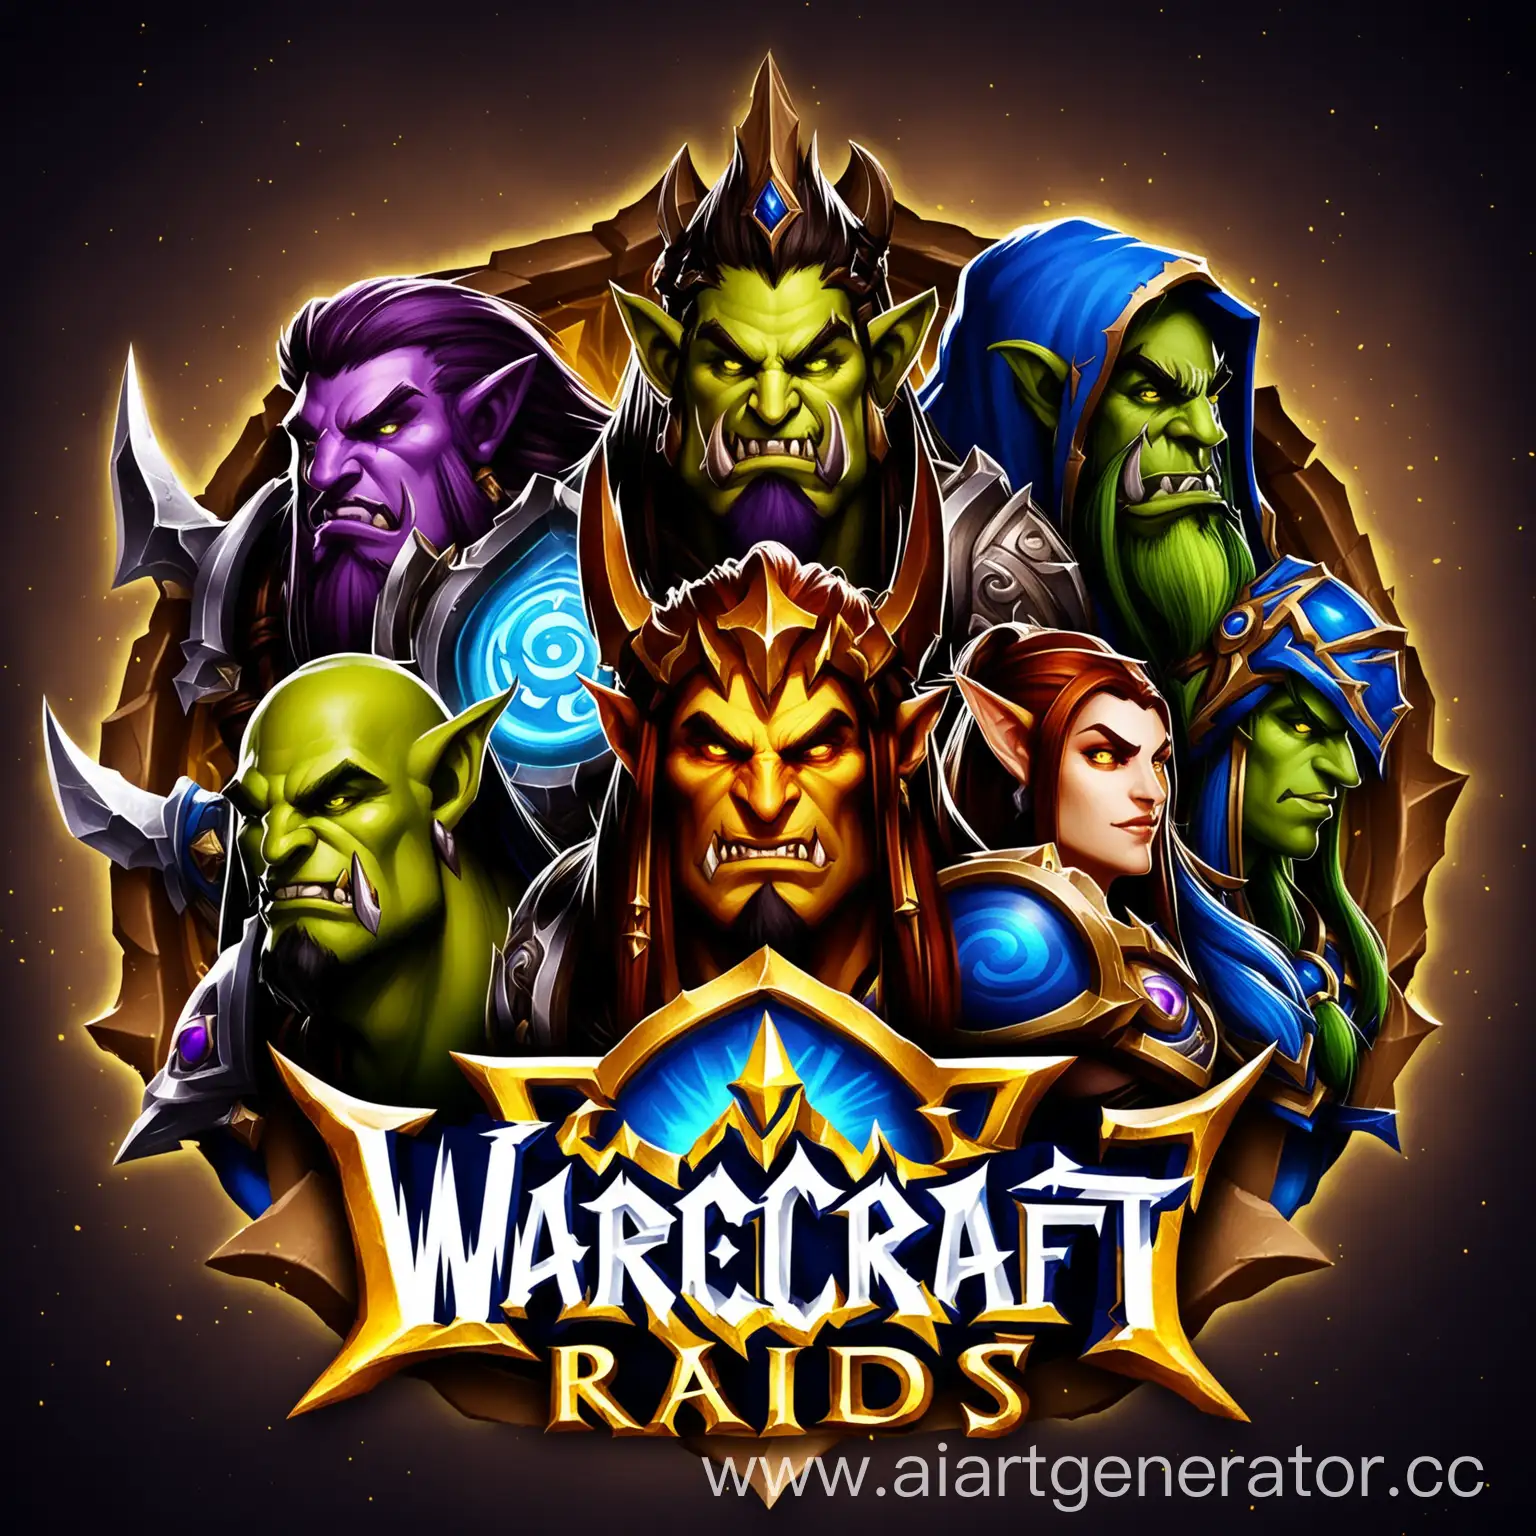 Dynamic-Warcraft-Raids-Logo-Design-Featuring-Heroic-Characters-Battling-in-Epic-Encounters